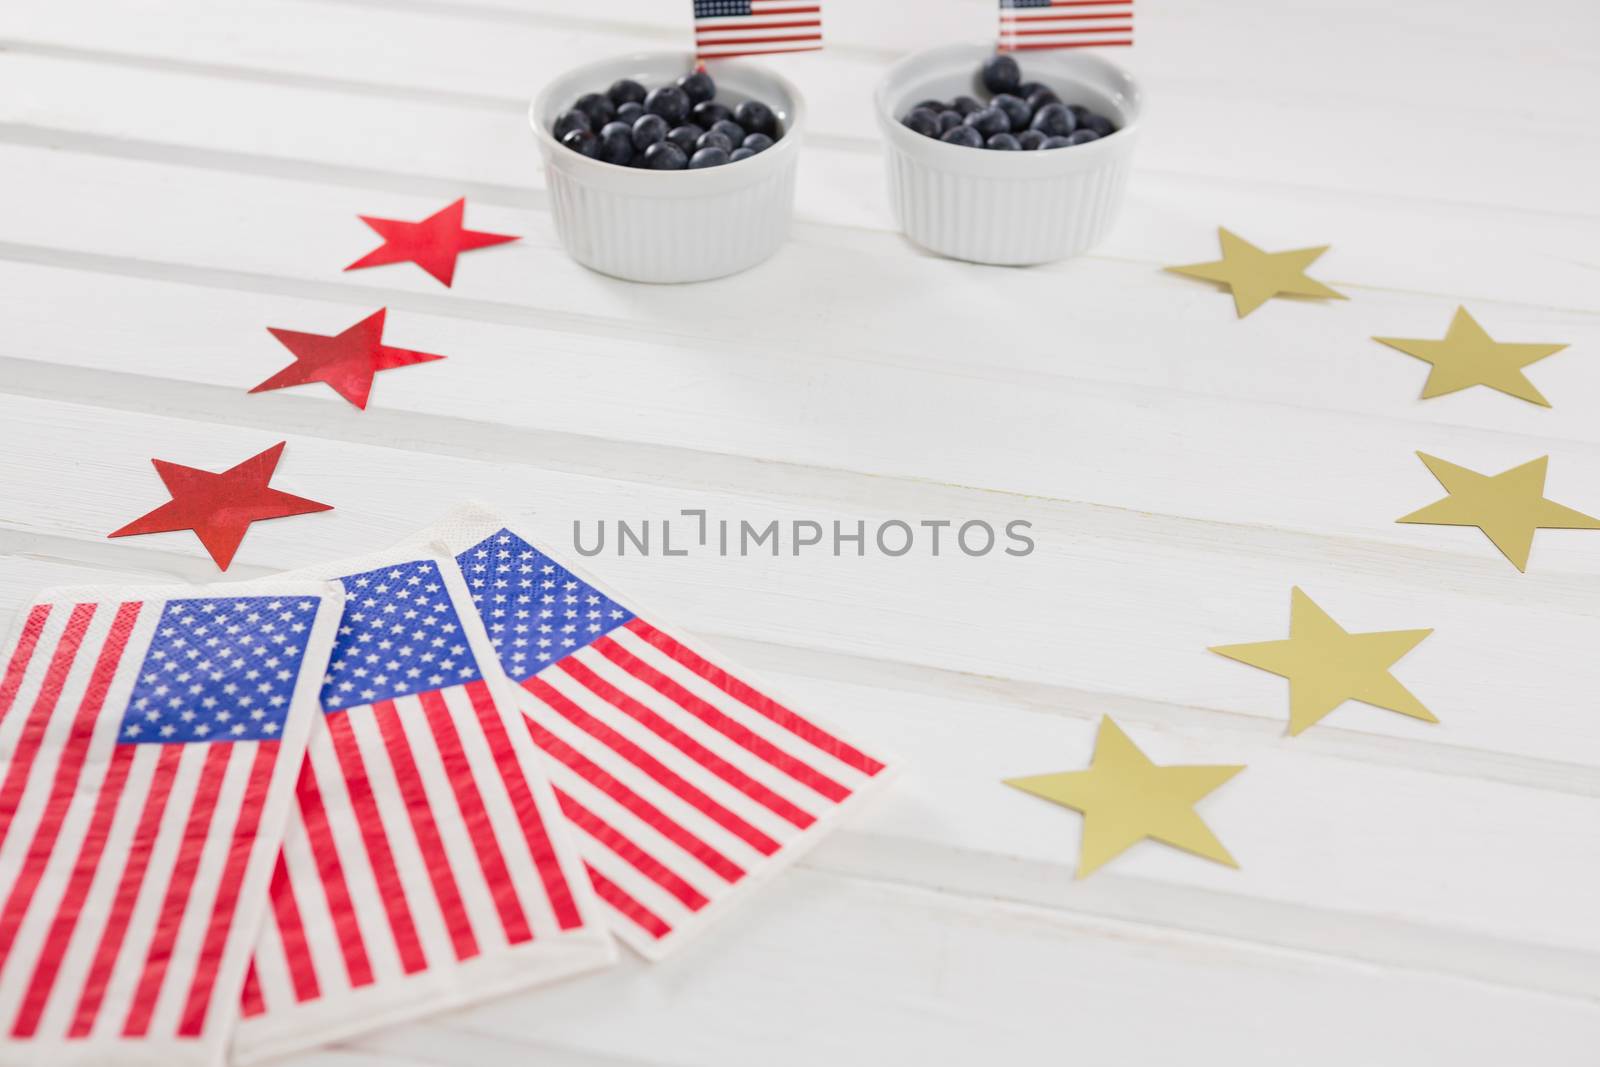 Black berries decorated with 4th july theme on wooden table